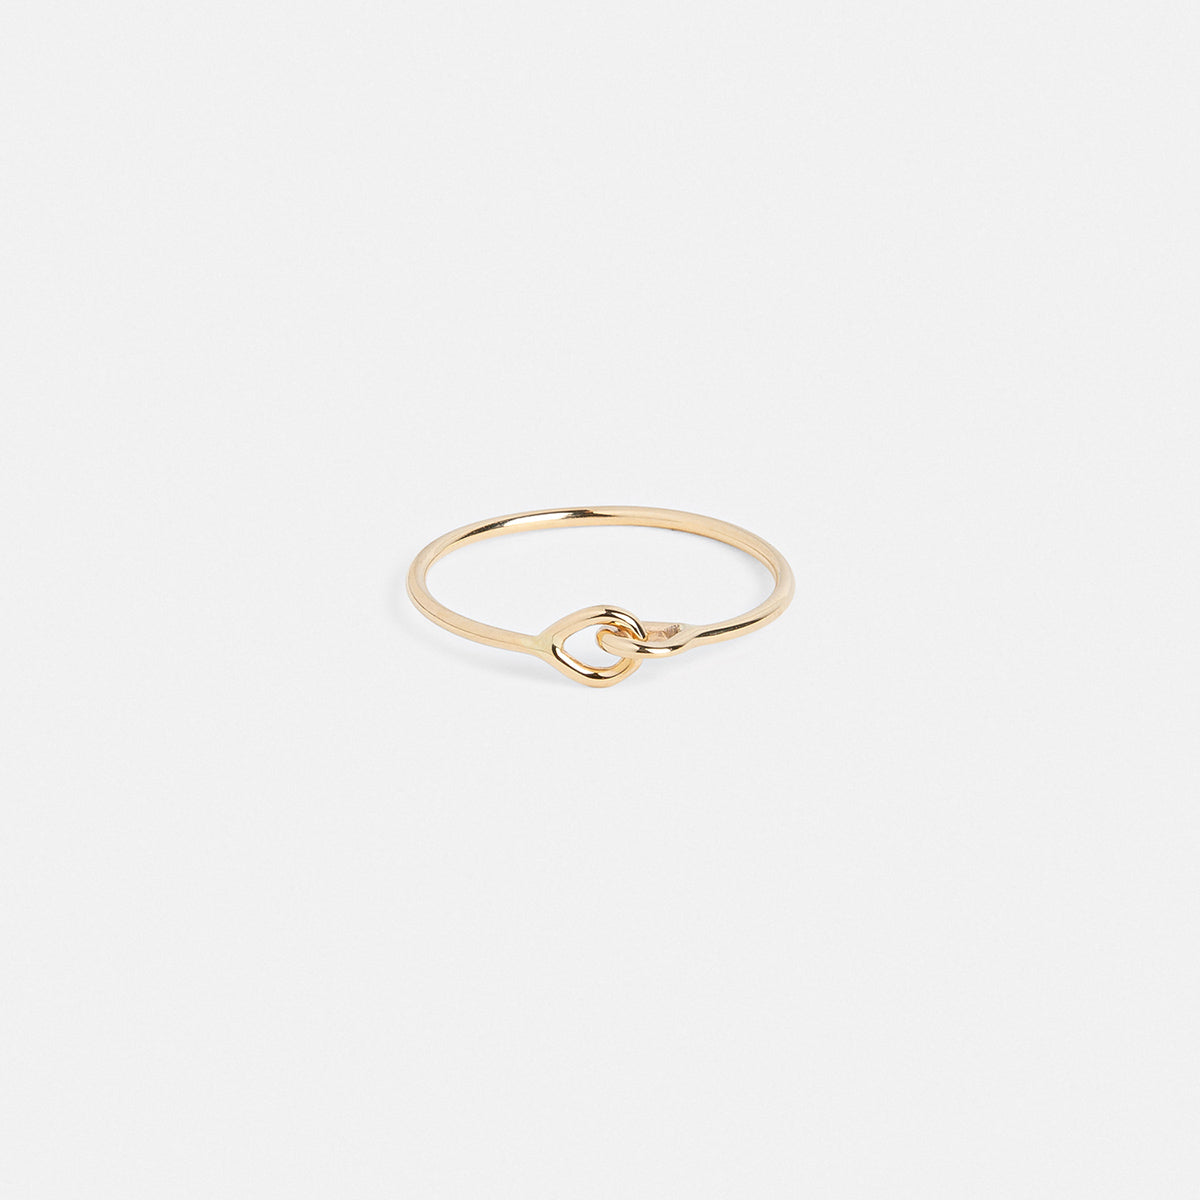 Yra Unusual Ring in 14k Gold By SHW Fine Jewelry NYC